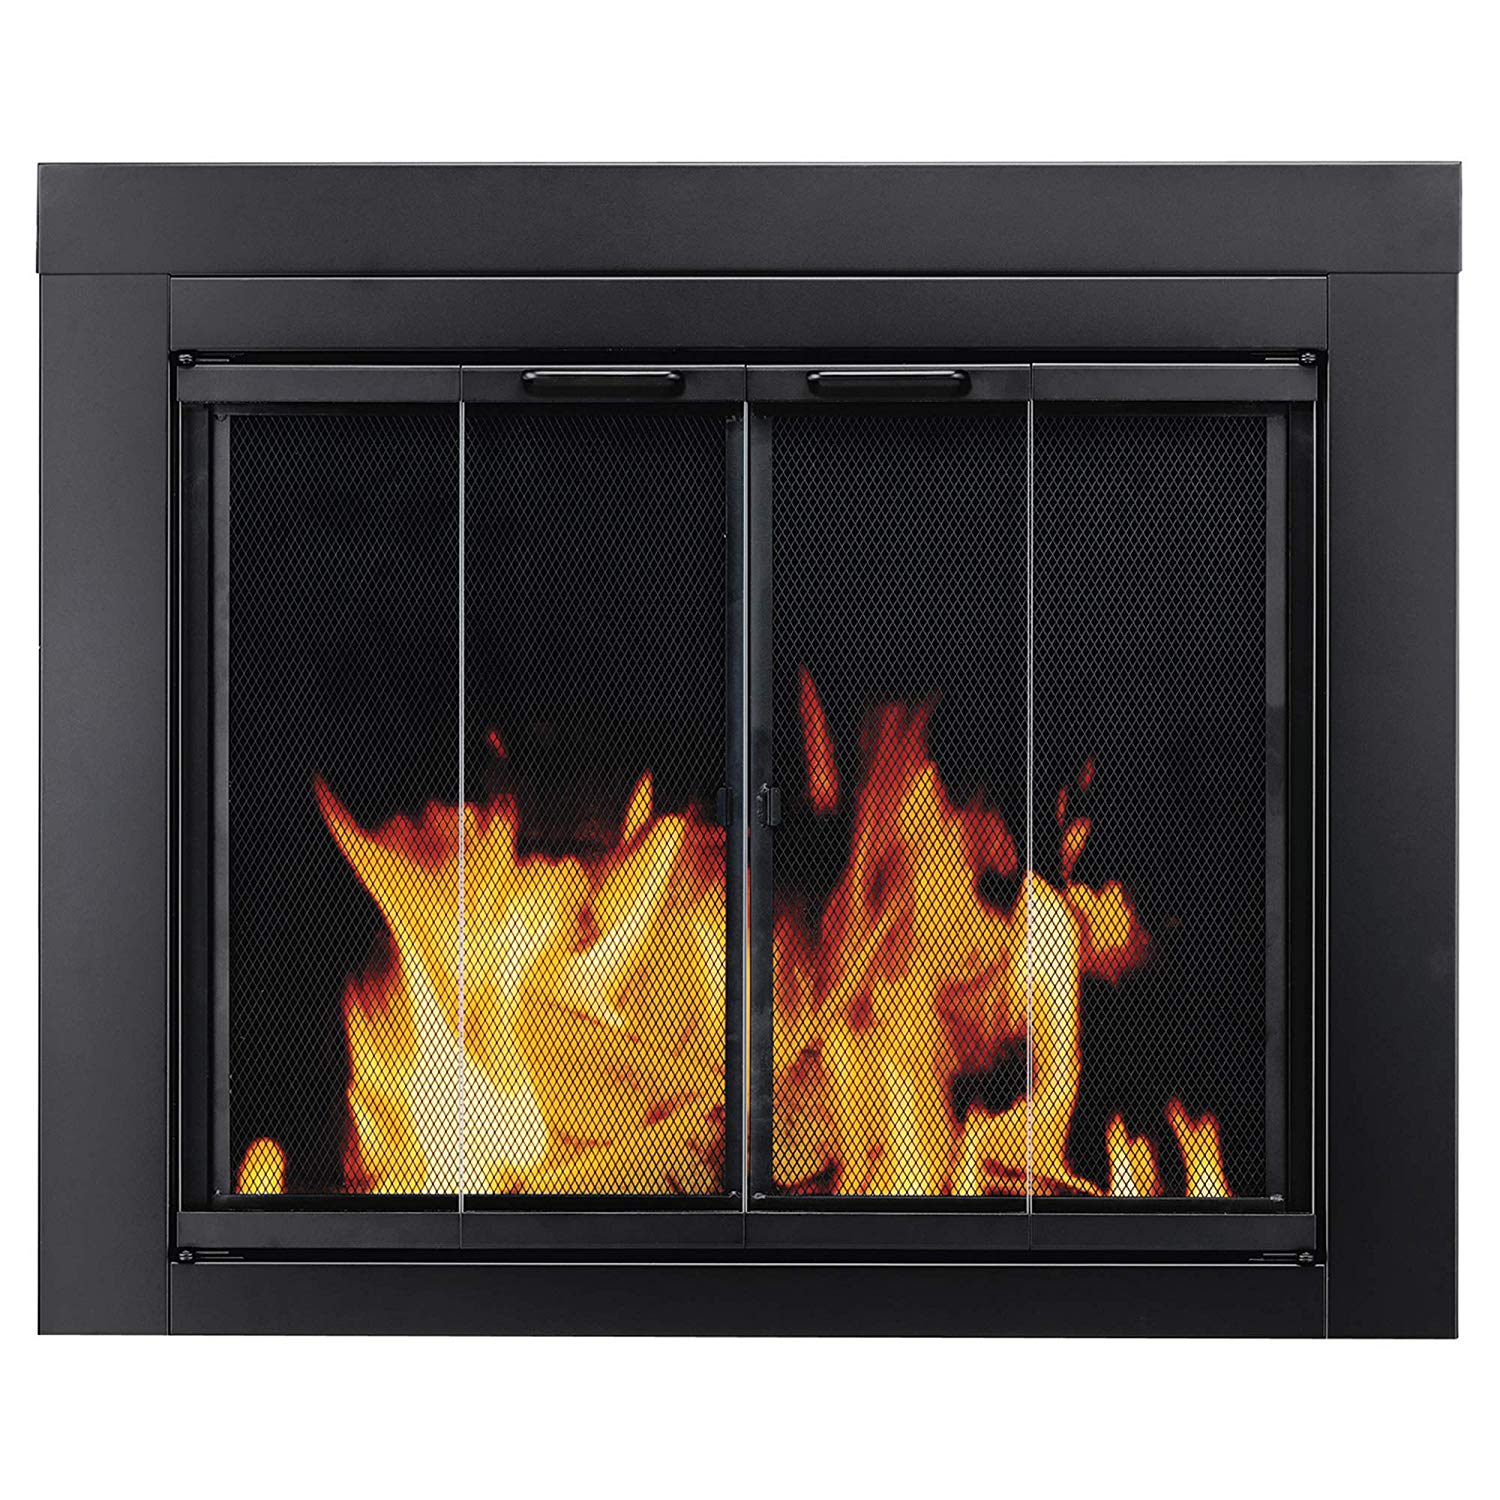 White Fireplace Screen New Pleasant Hearth at 1000 ascot Fireplace Glass Door Black Small